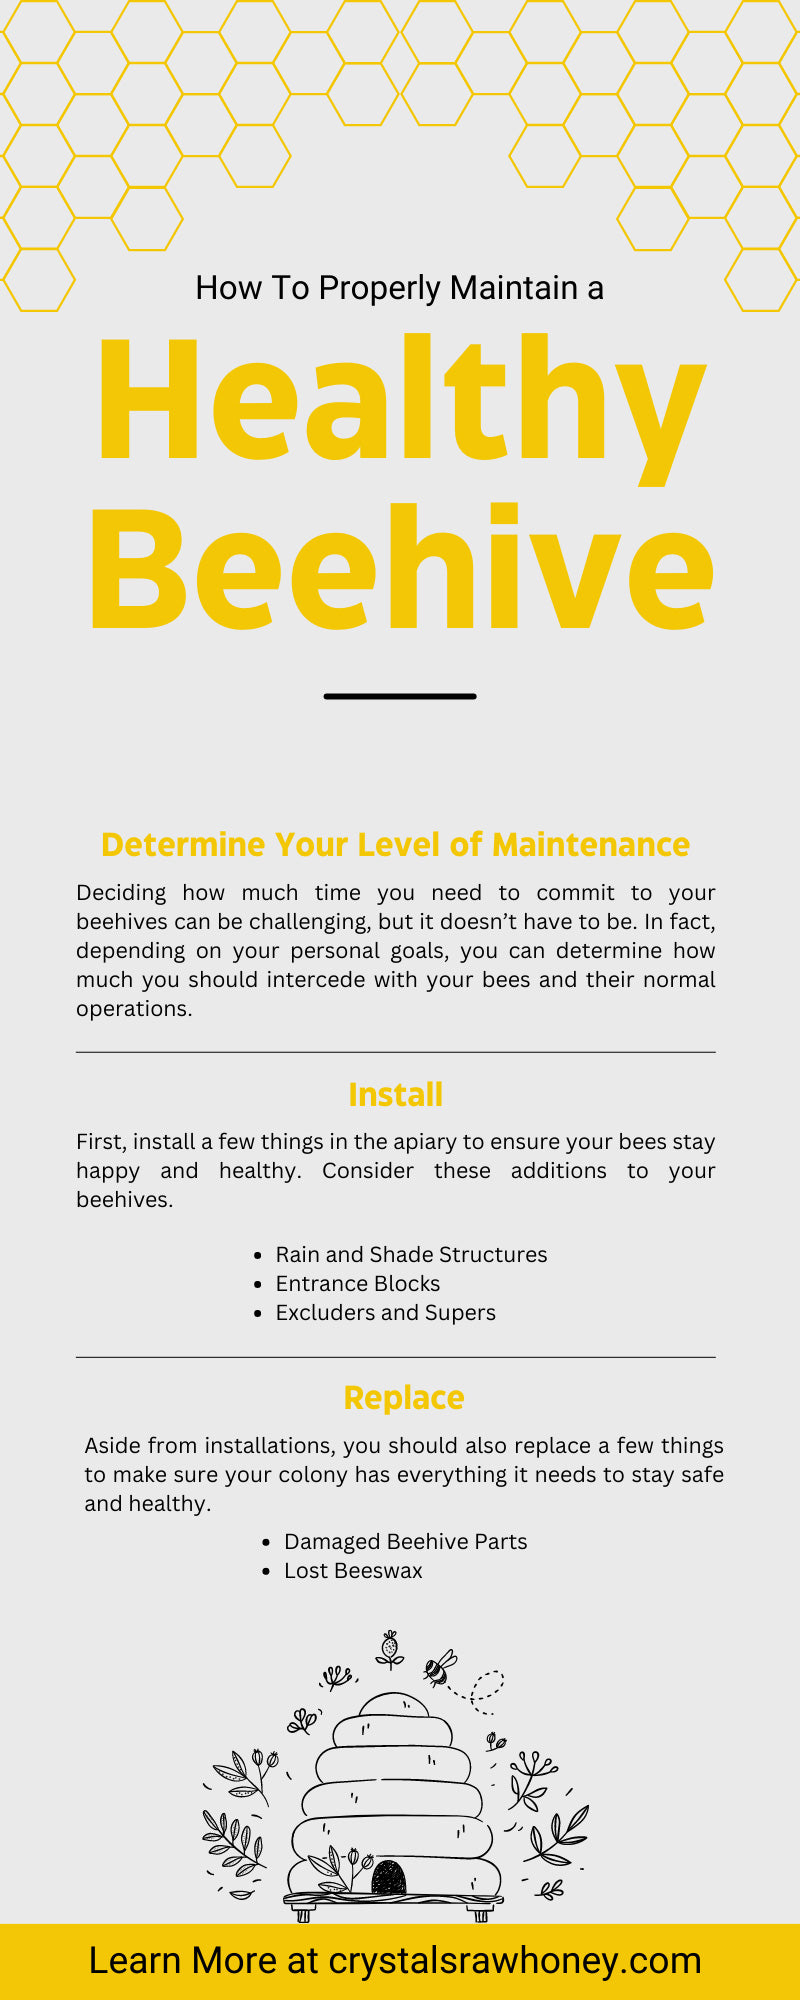 How To Properly Maintain a Healthy Beehive